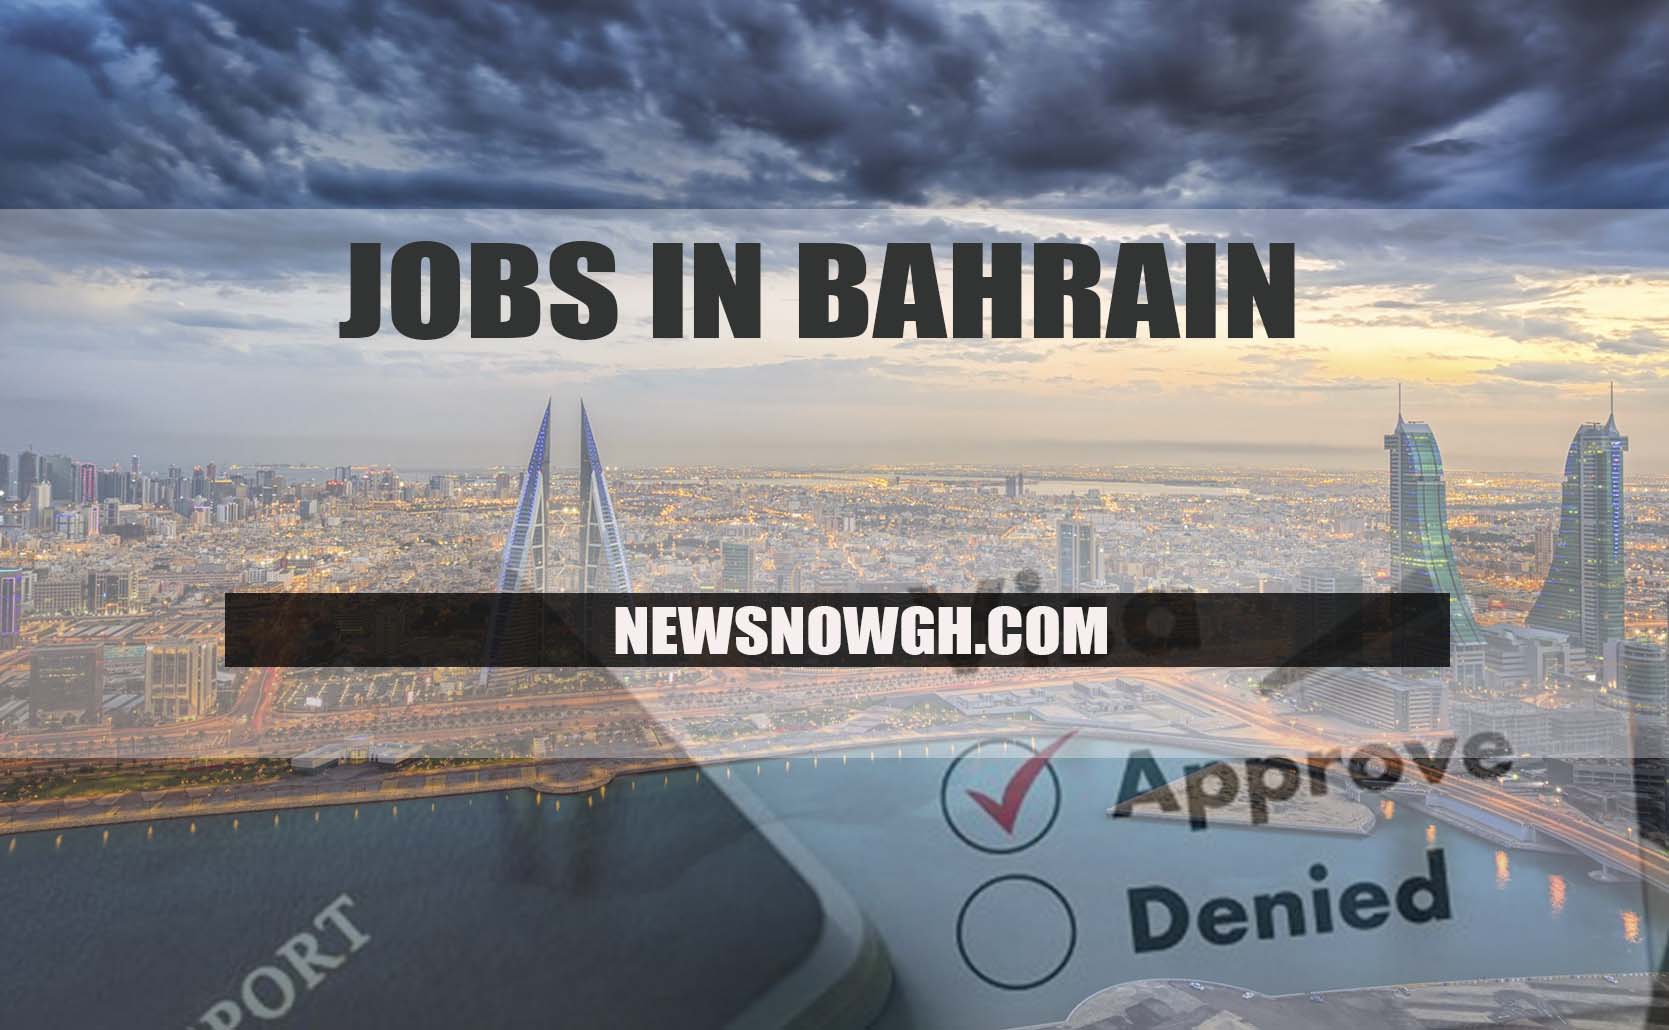 BAHRAIN JOBS FOR CLEANERS, STOREKEEPERS AND OTHERS